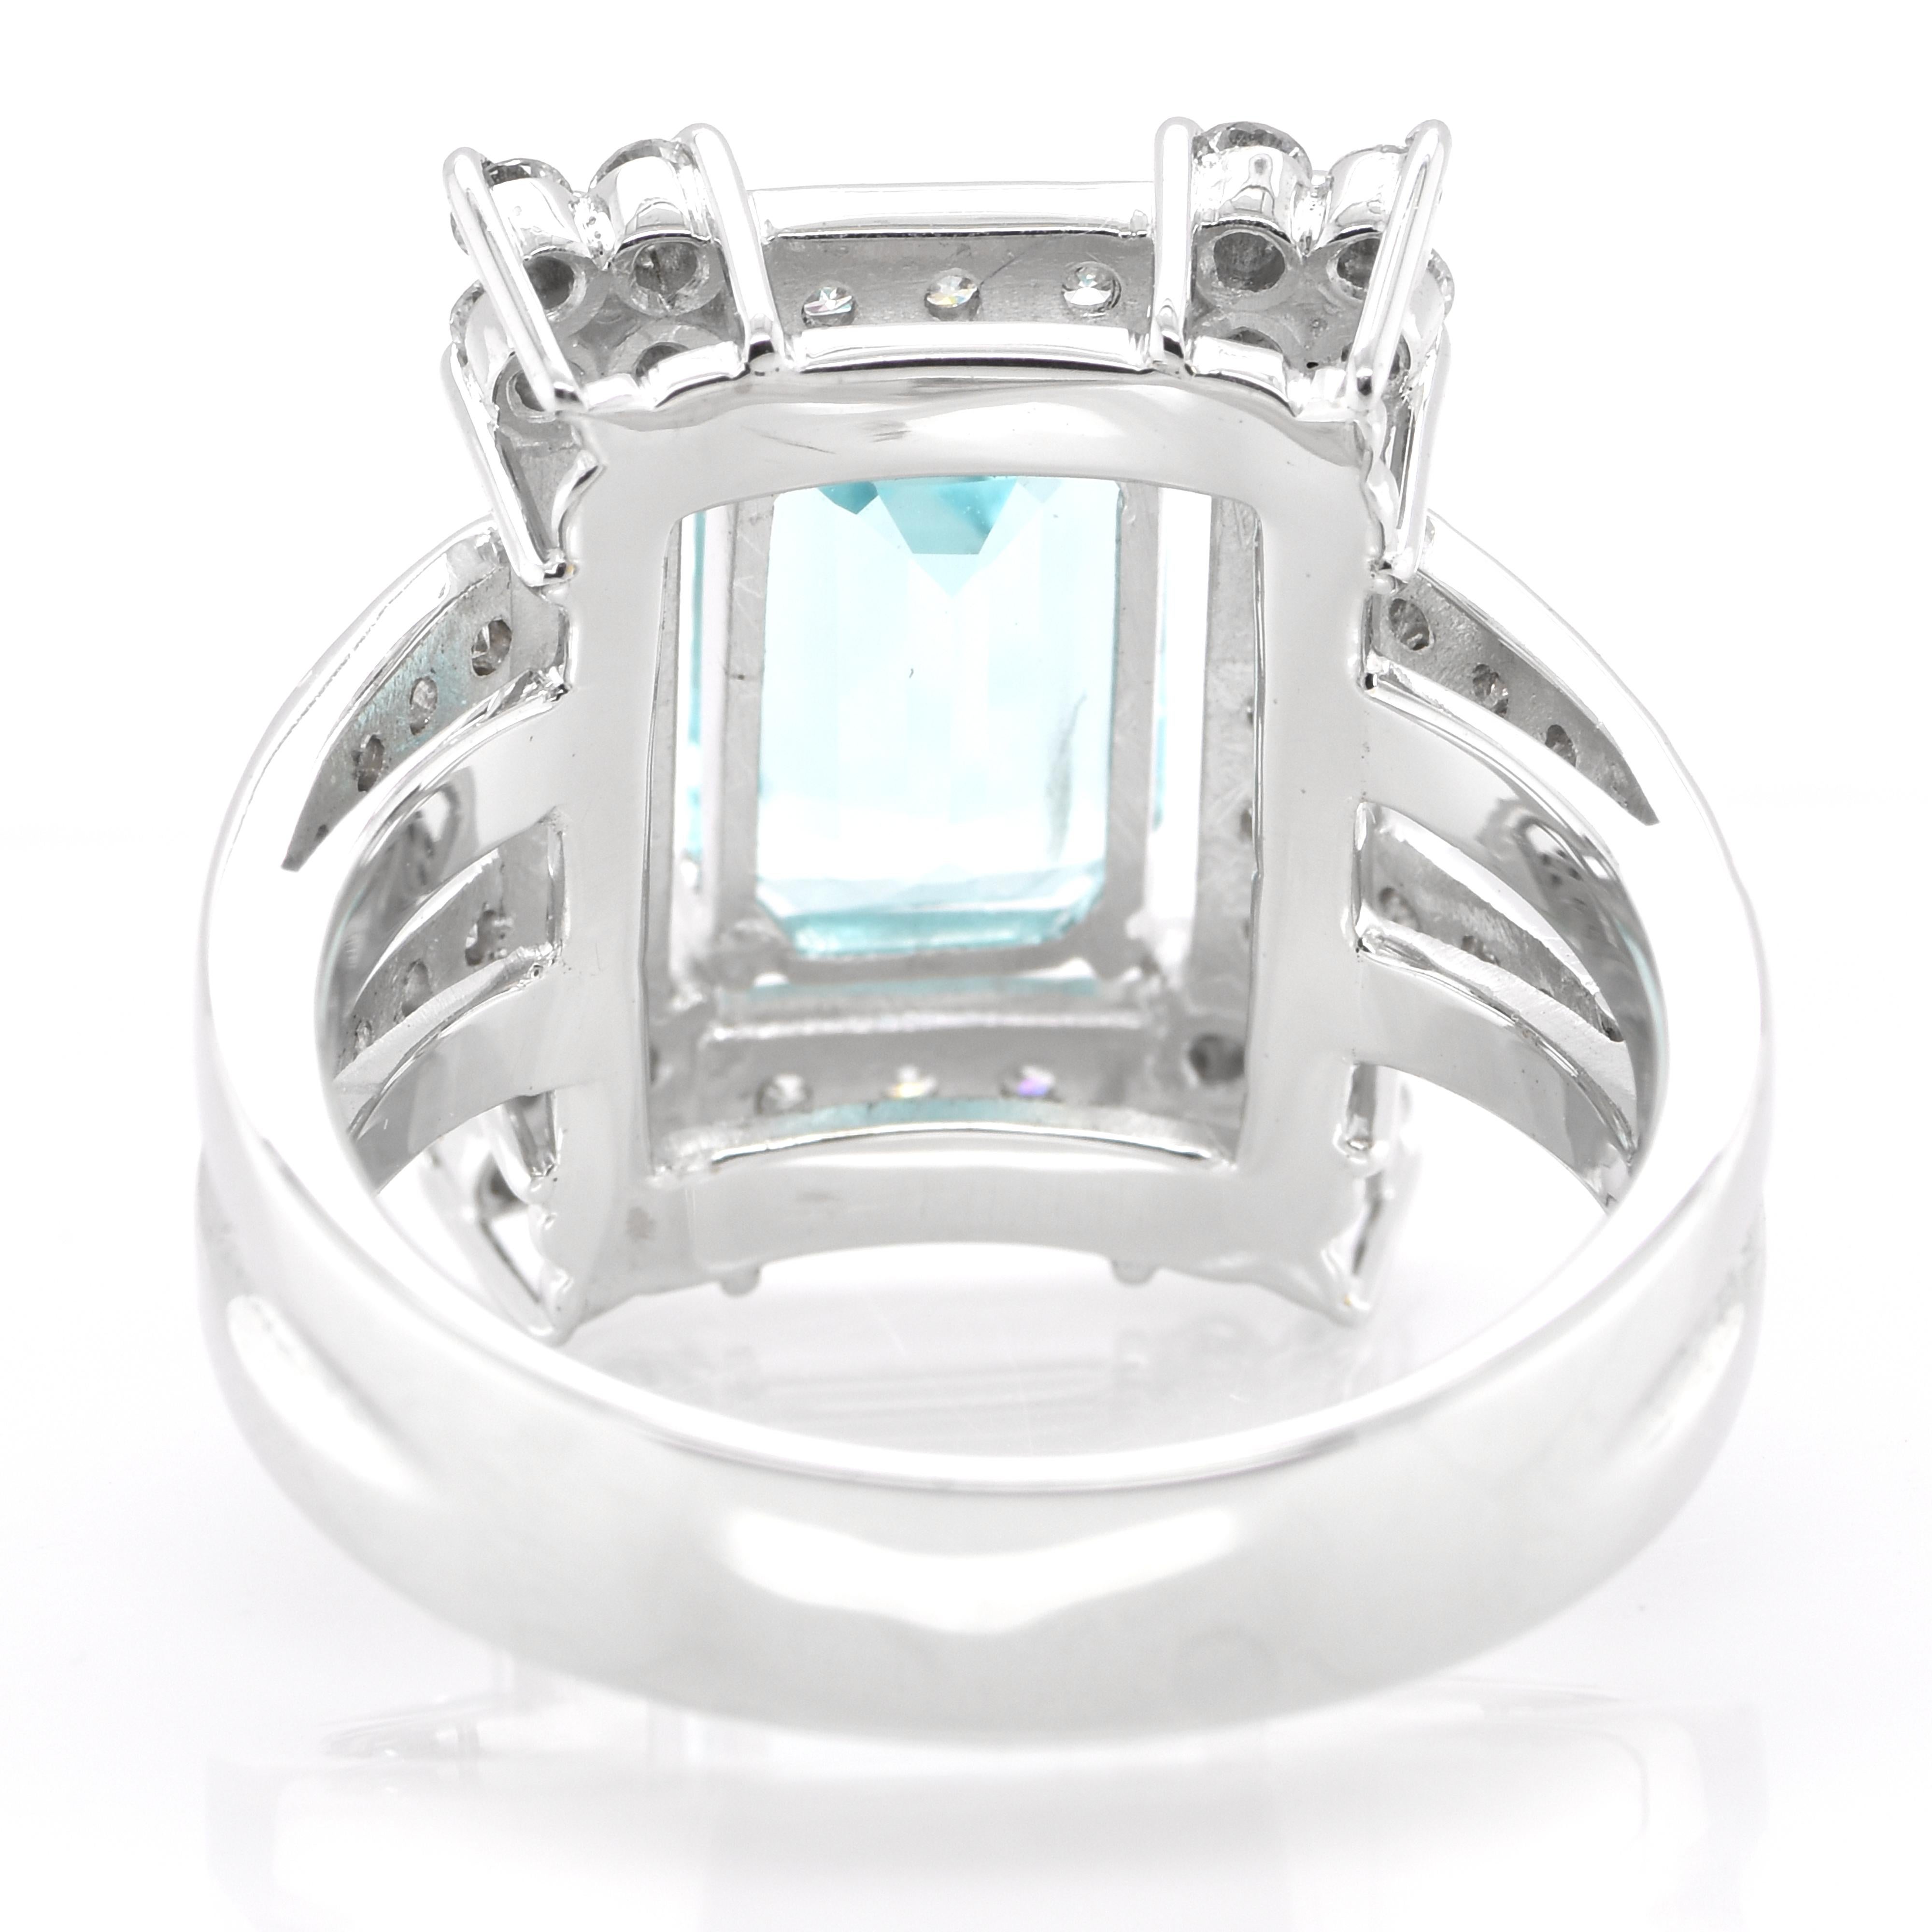 Women's 2.38 Carat Natural Paraiba Tourmaline and Diamond Ring Set in 18K White Gold For Sale